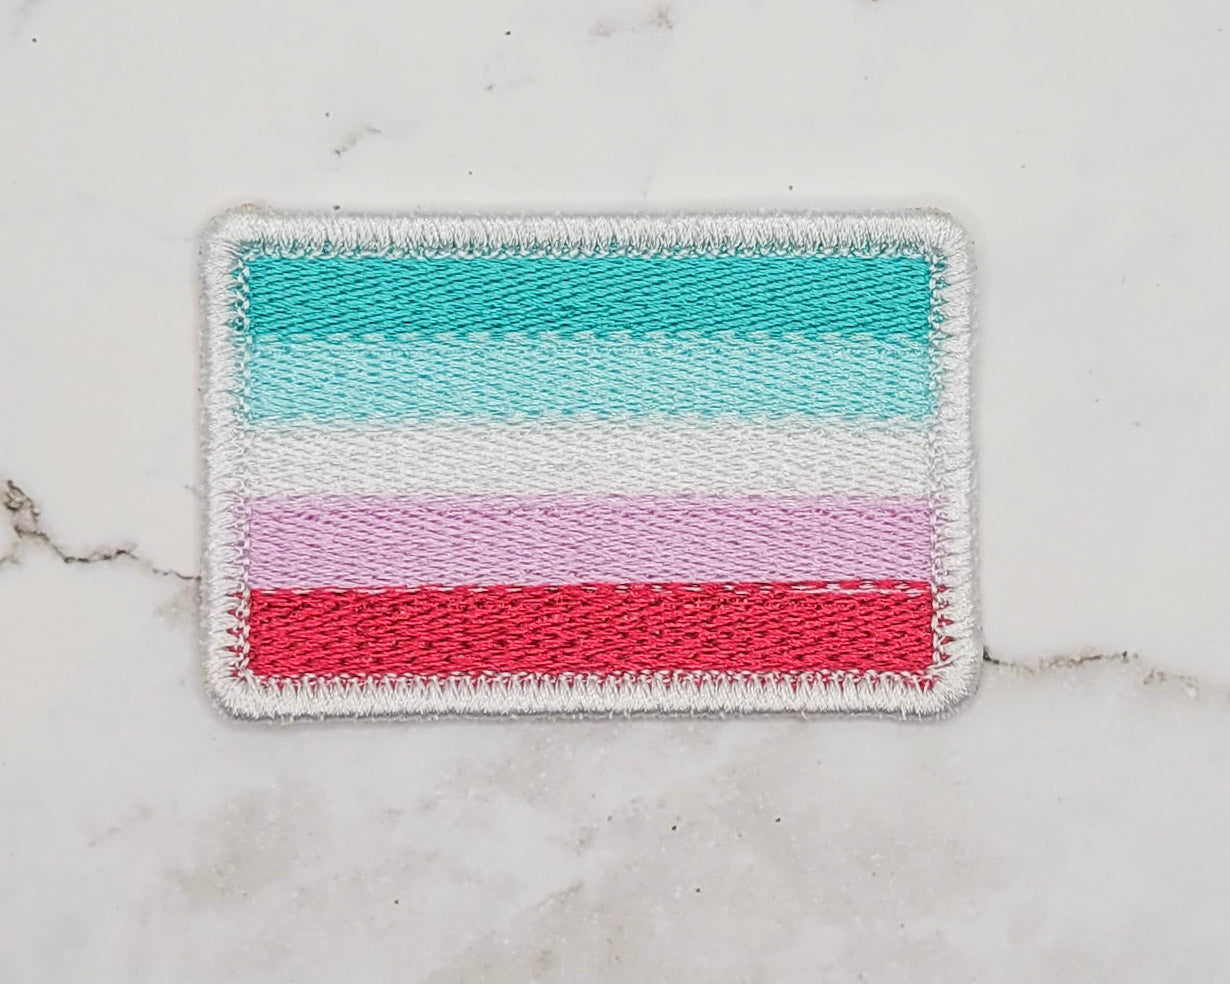 Abrosexual Pride Flag Patch & Pinback Button